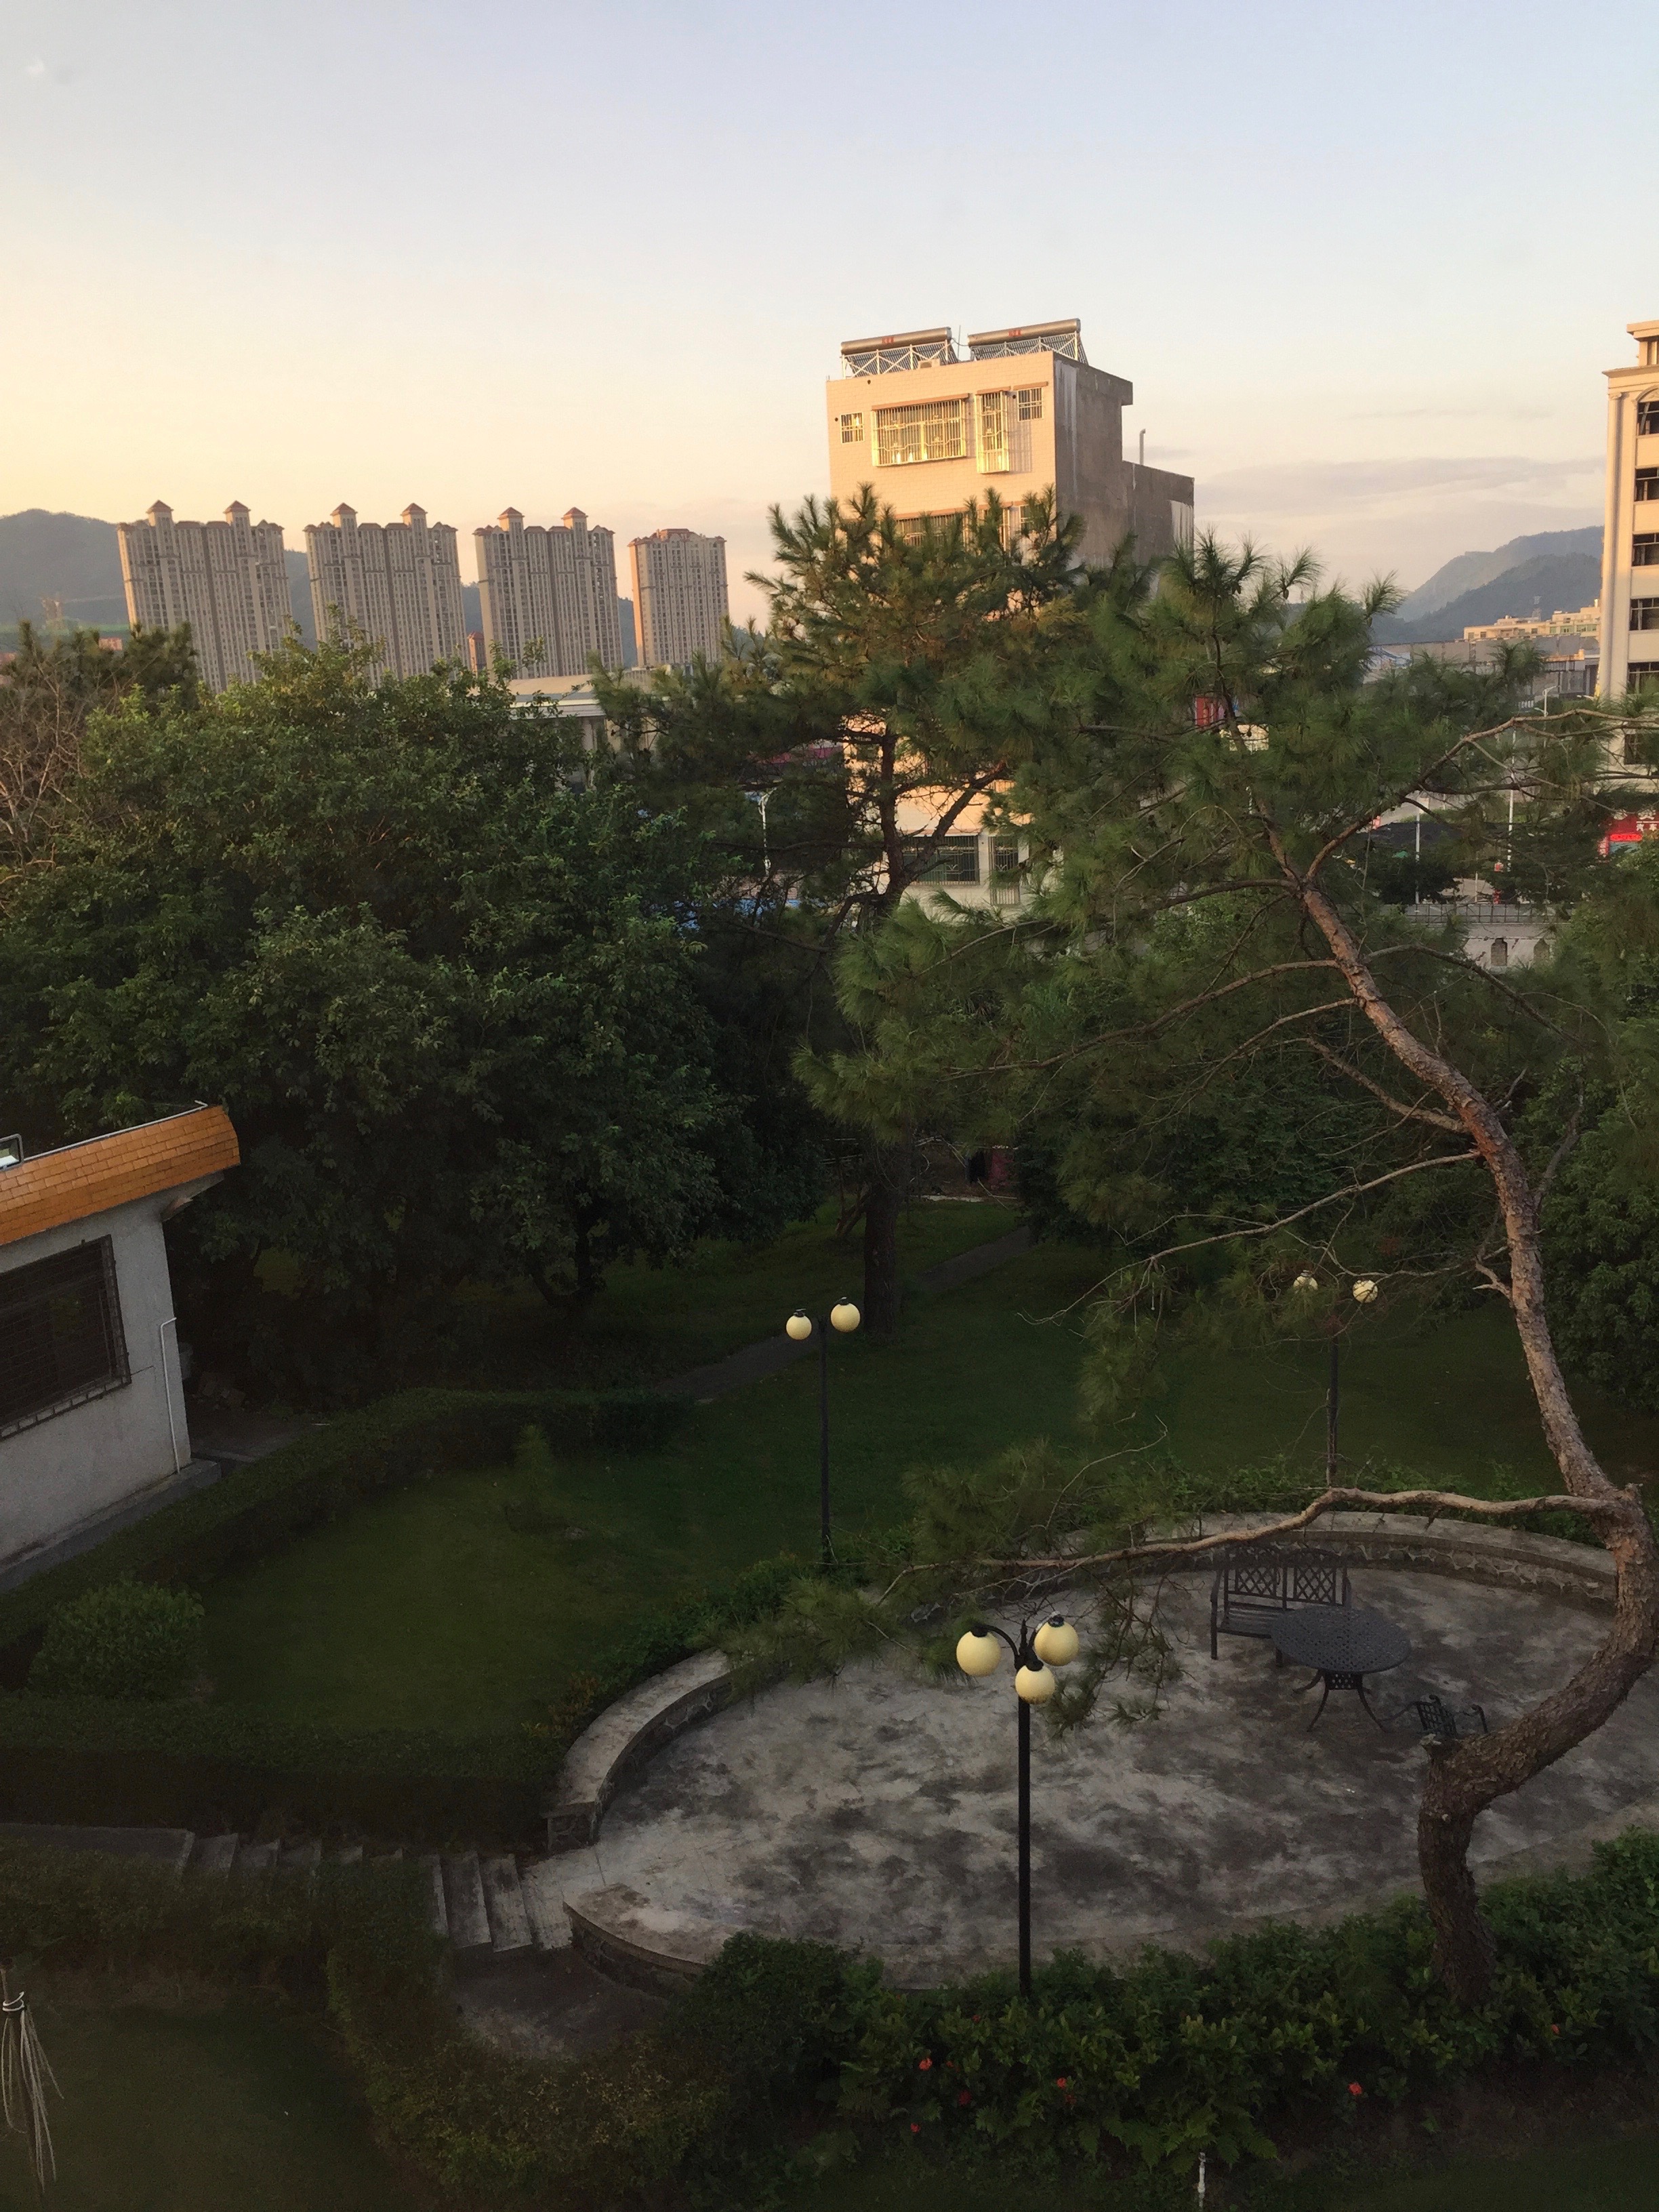  This was an early morning view from my dorm room. &nbsp;You can see the newly built high rises in Pingshan in the distance. &nbsp;The rate of construction was incredible!&nbsp; Many of these buildings sit empty as just a shells without even any wind